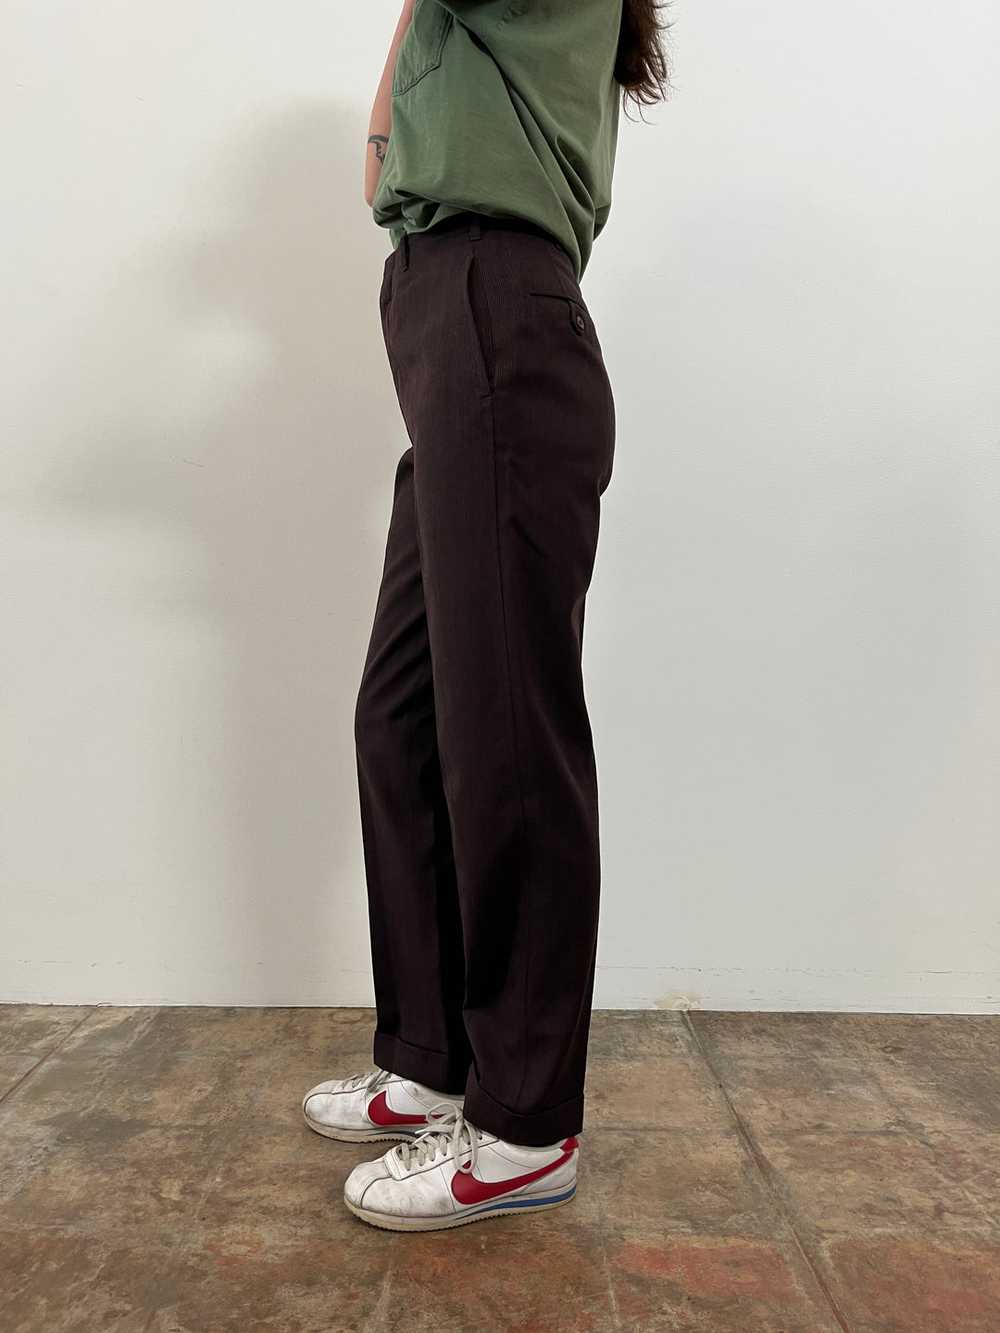 50s/60s Brown Twill Work Pants - image 2